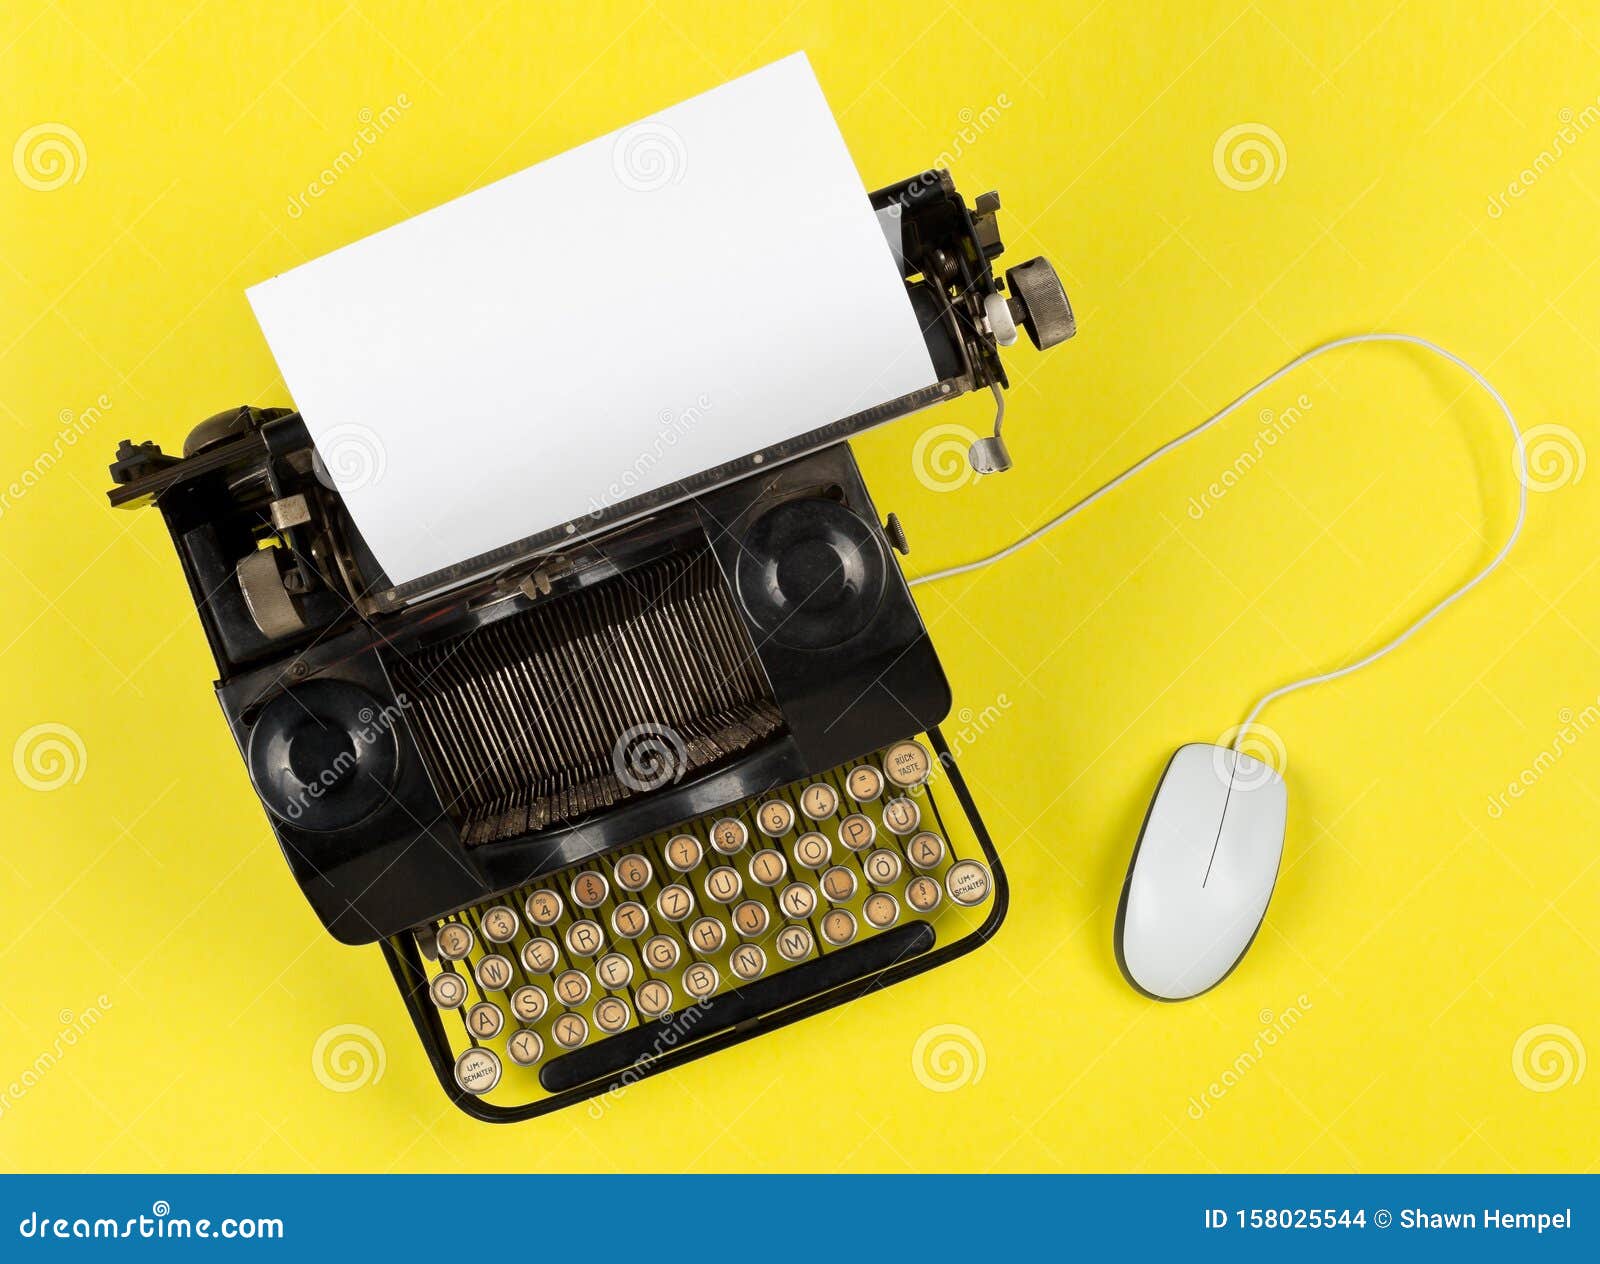 antique retro mechanical typewriter with modern computer mouse on yellow background - digitalization, digitization or